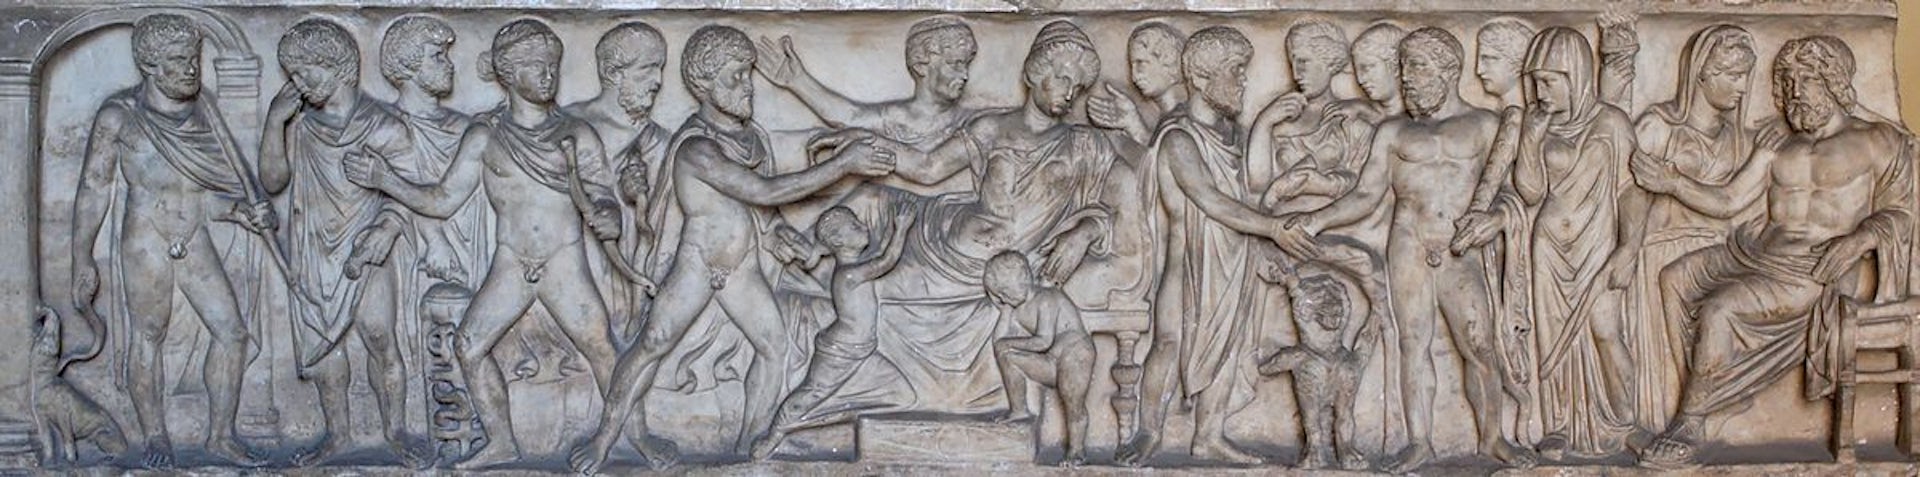 Marble sarcophagus decorated with scenes from the myth of Admetus and Alcestis